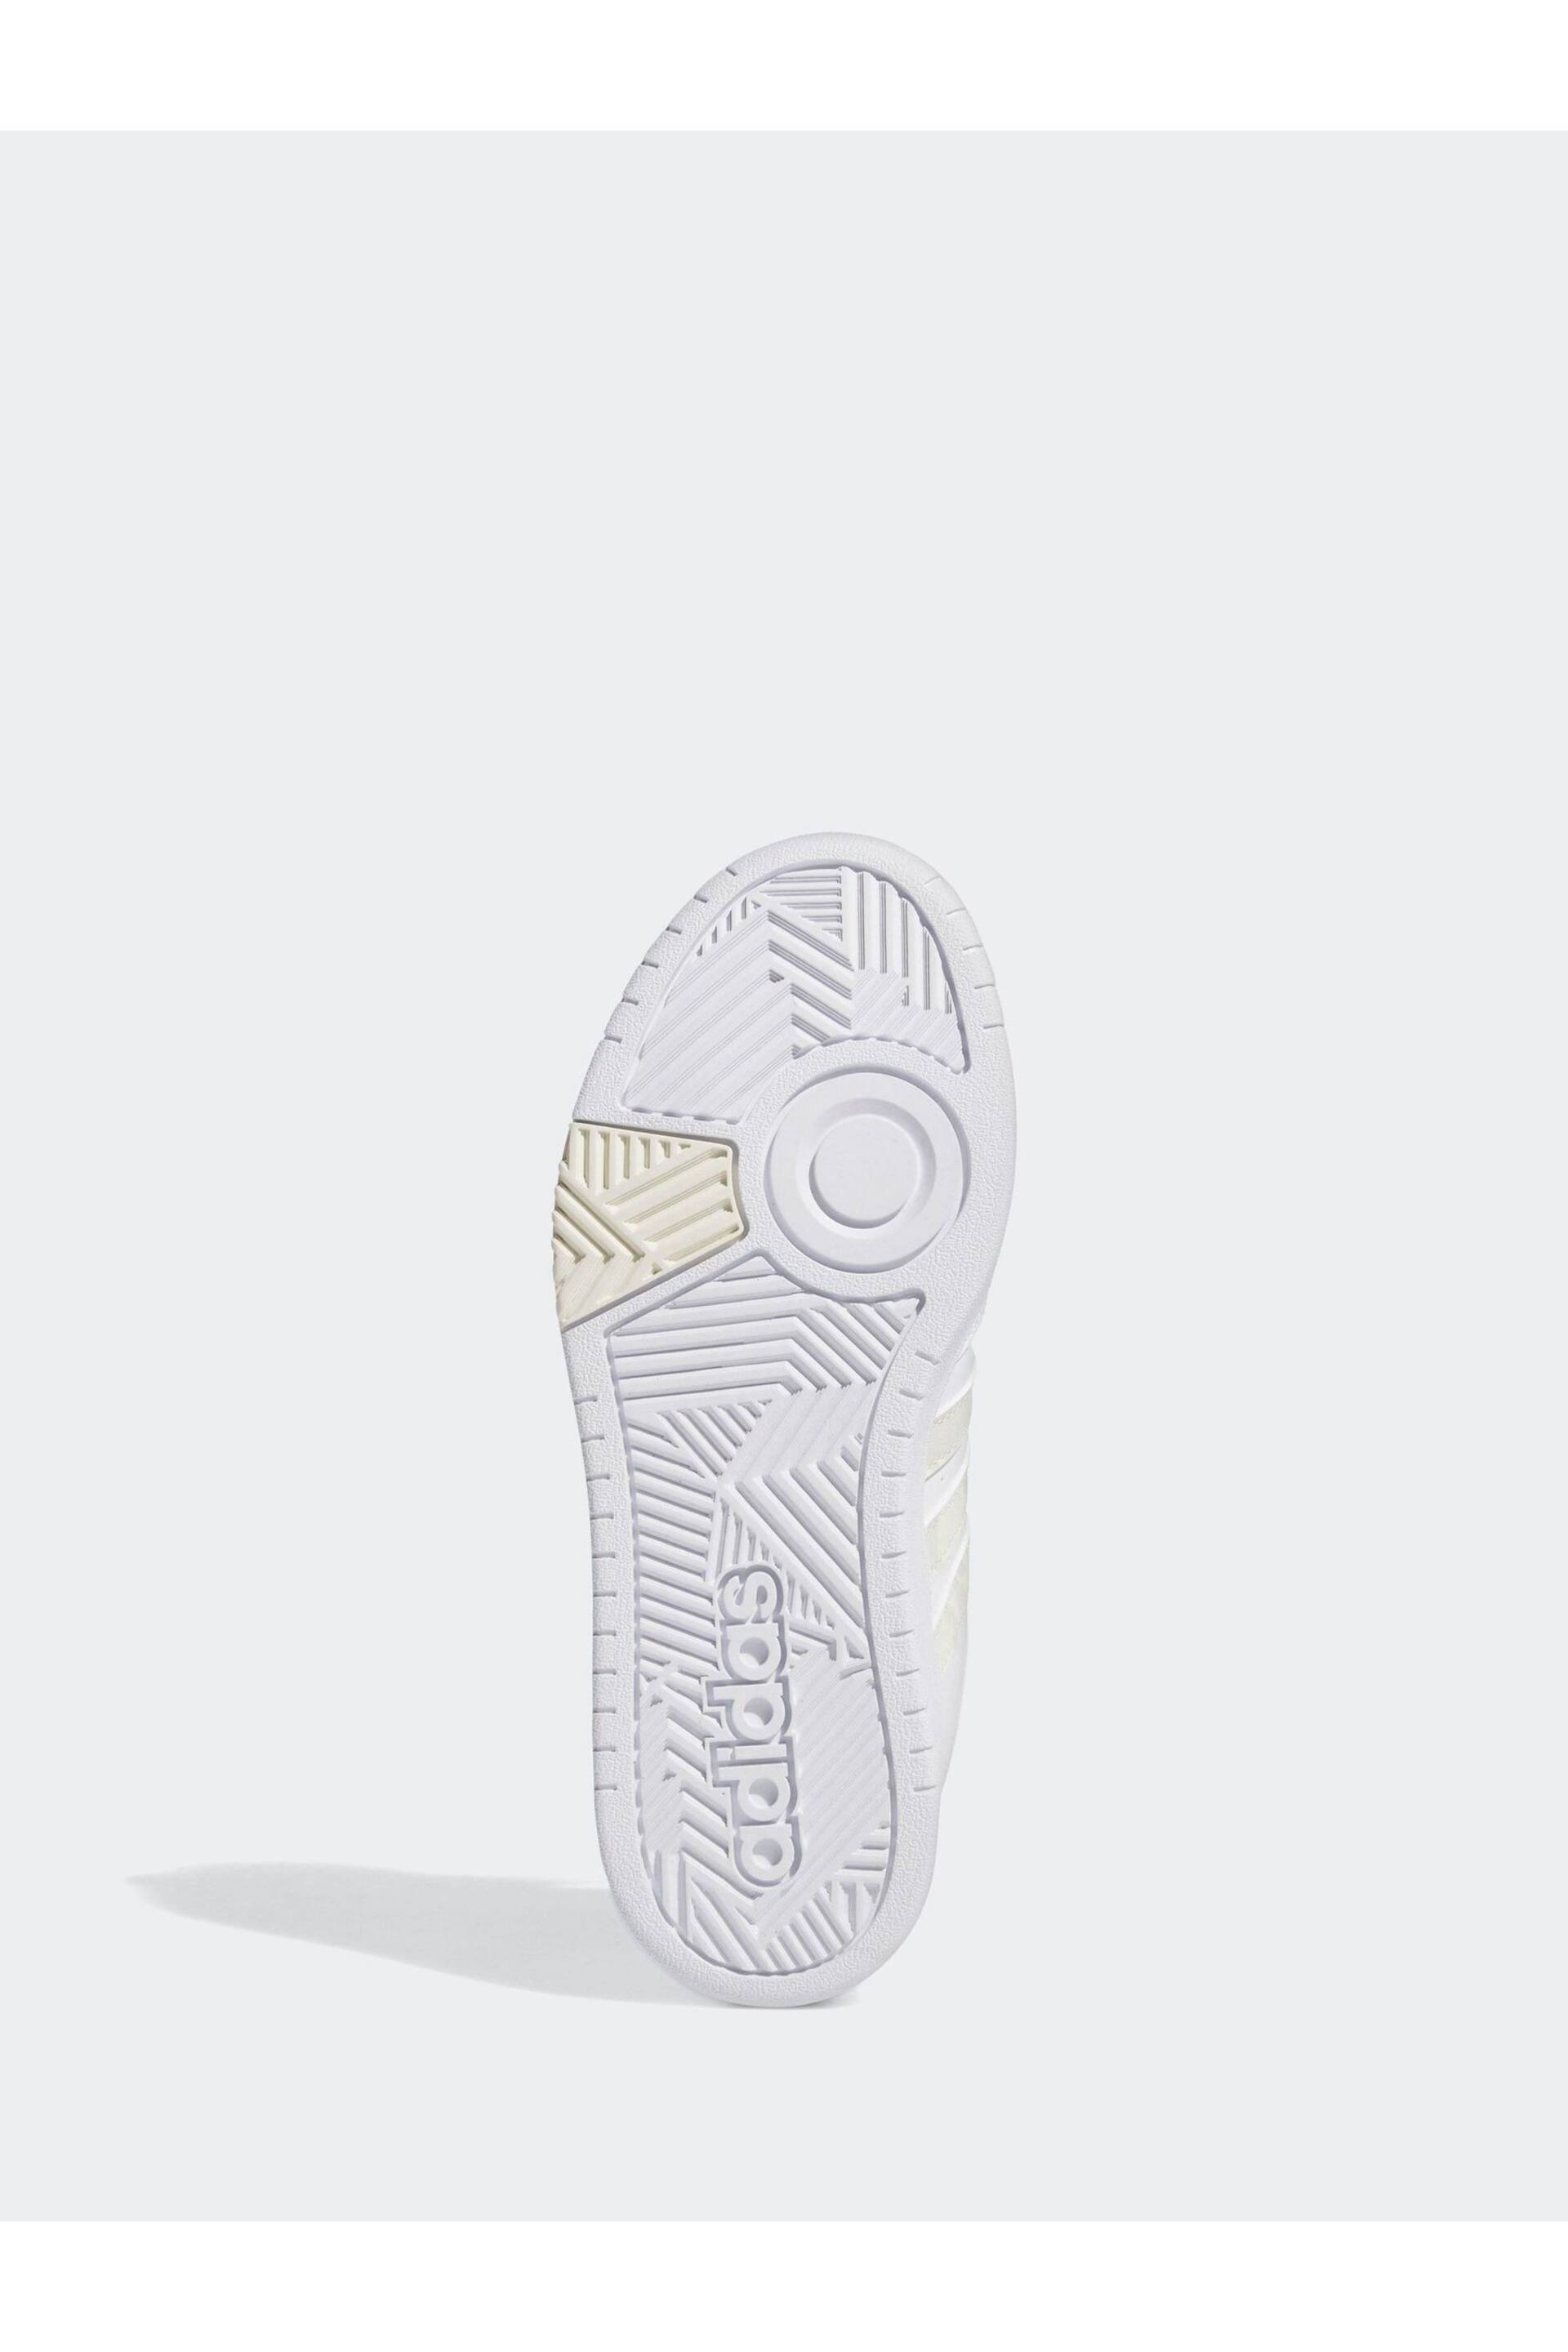 adidas White Originals Hoops 3 Trainers - Image 6 of 8